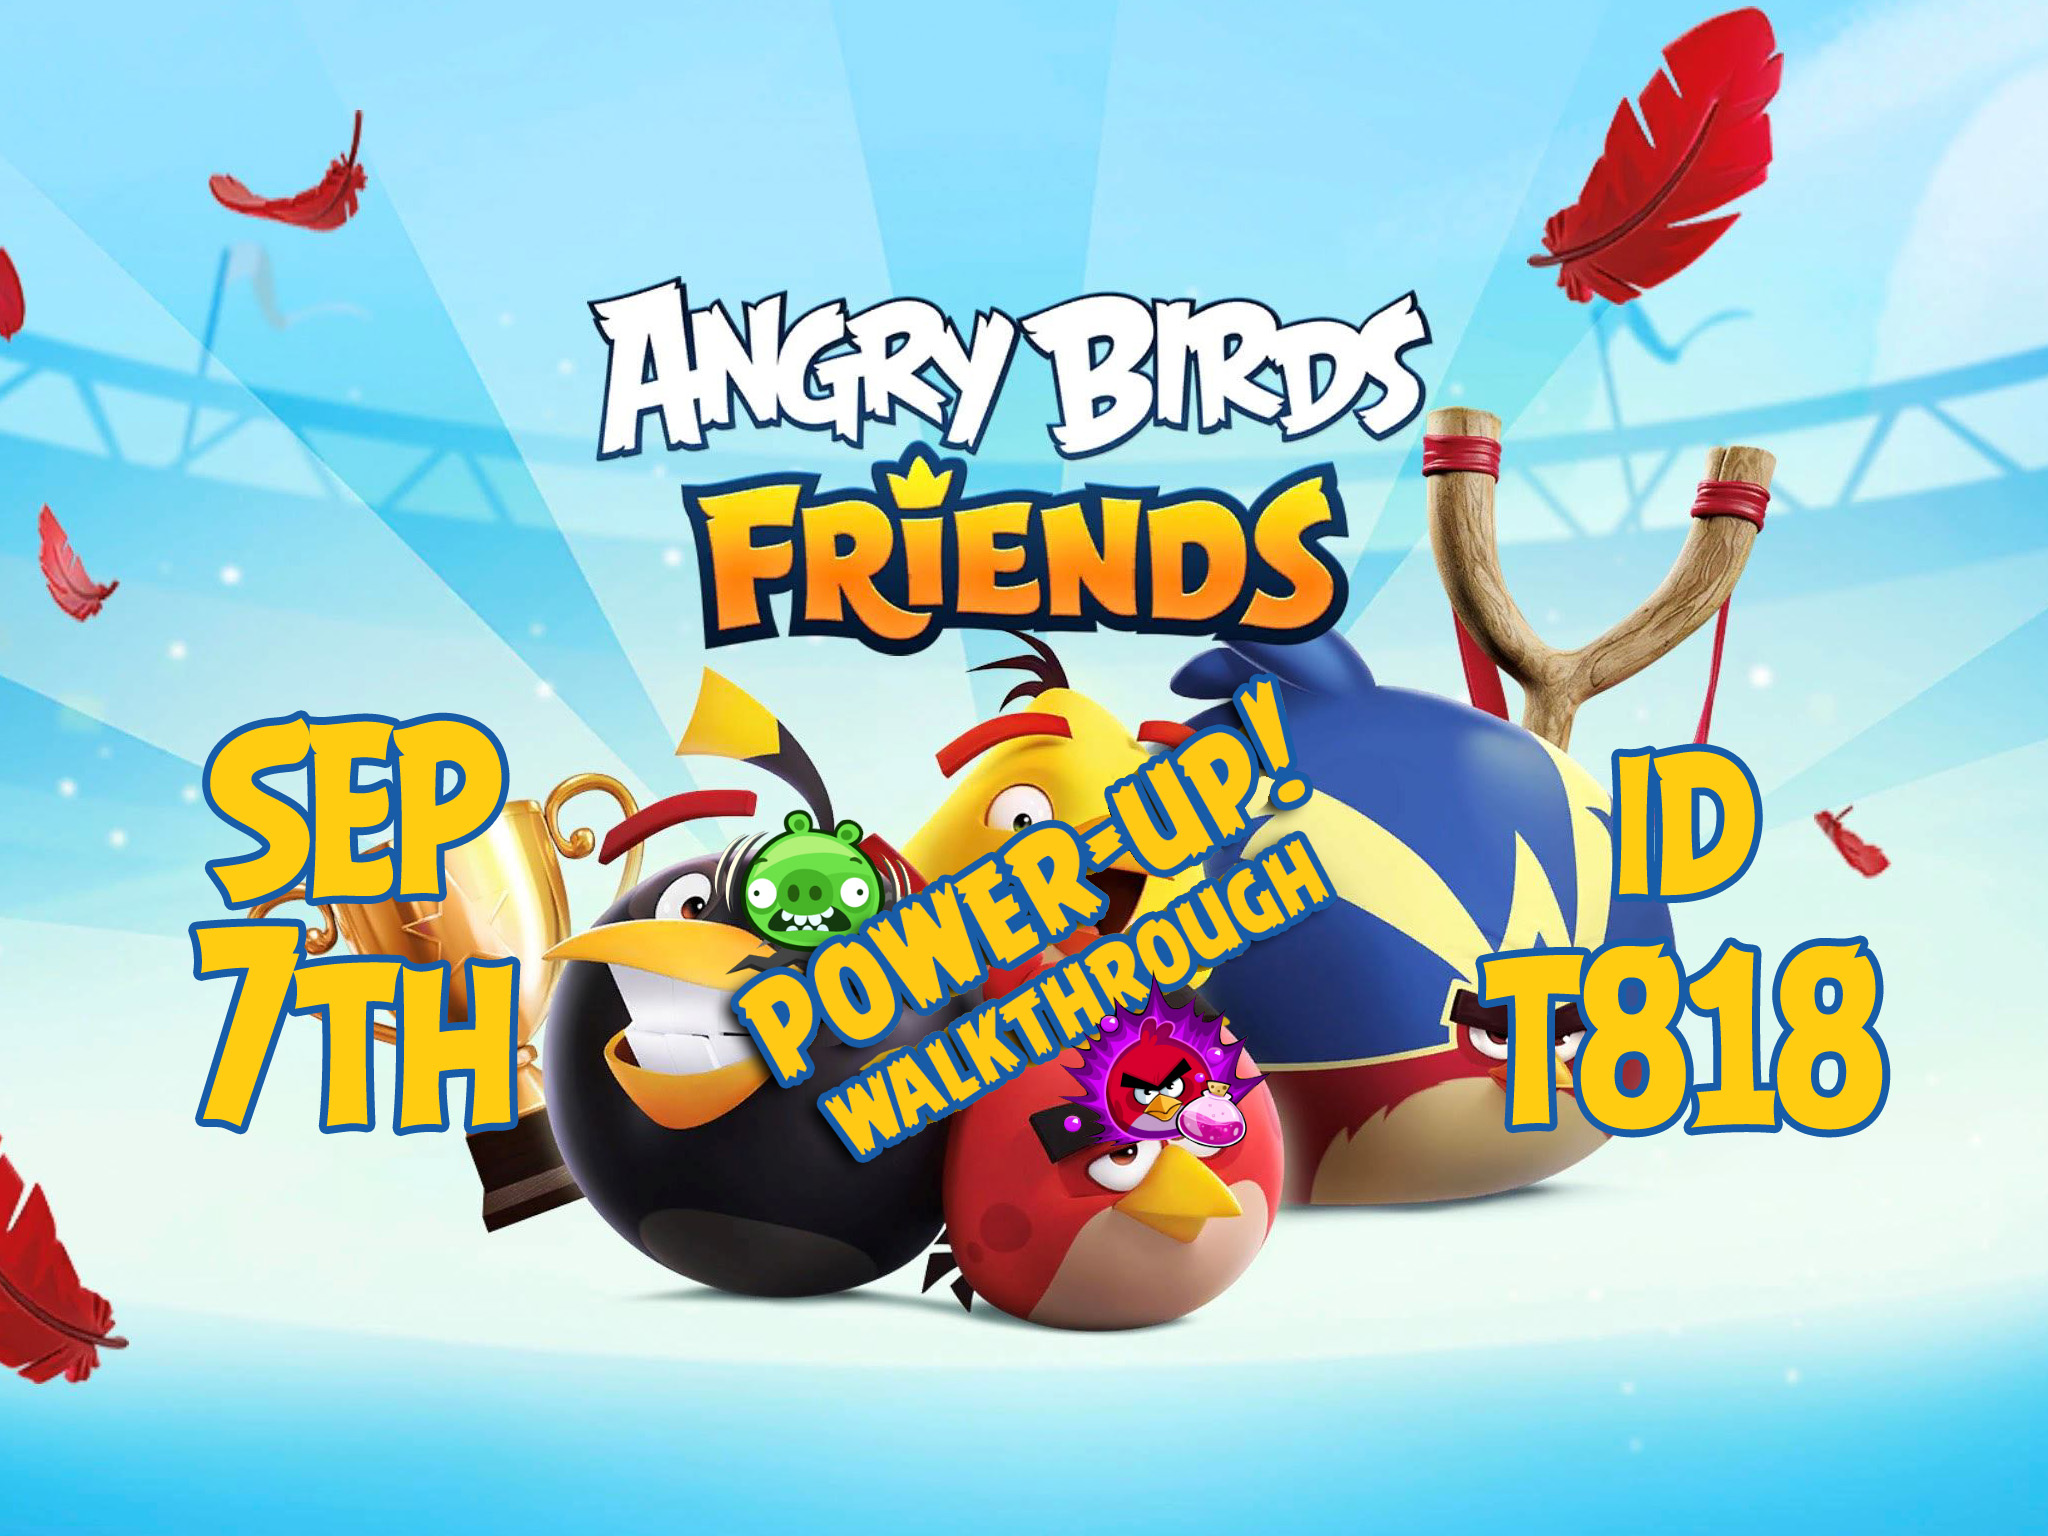 Angry-Birds-Friends-Tournament-T818-Feature-Image-PU